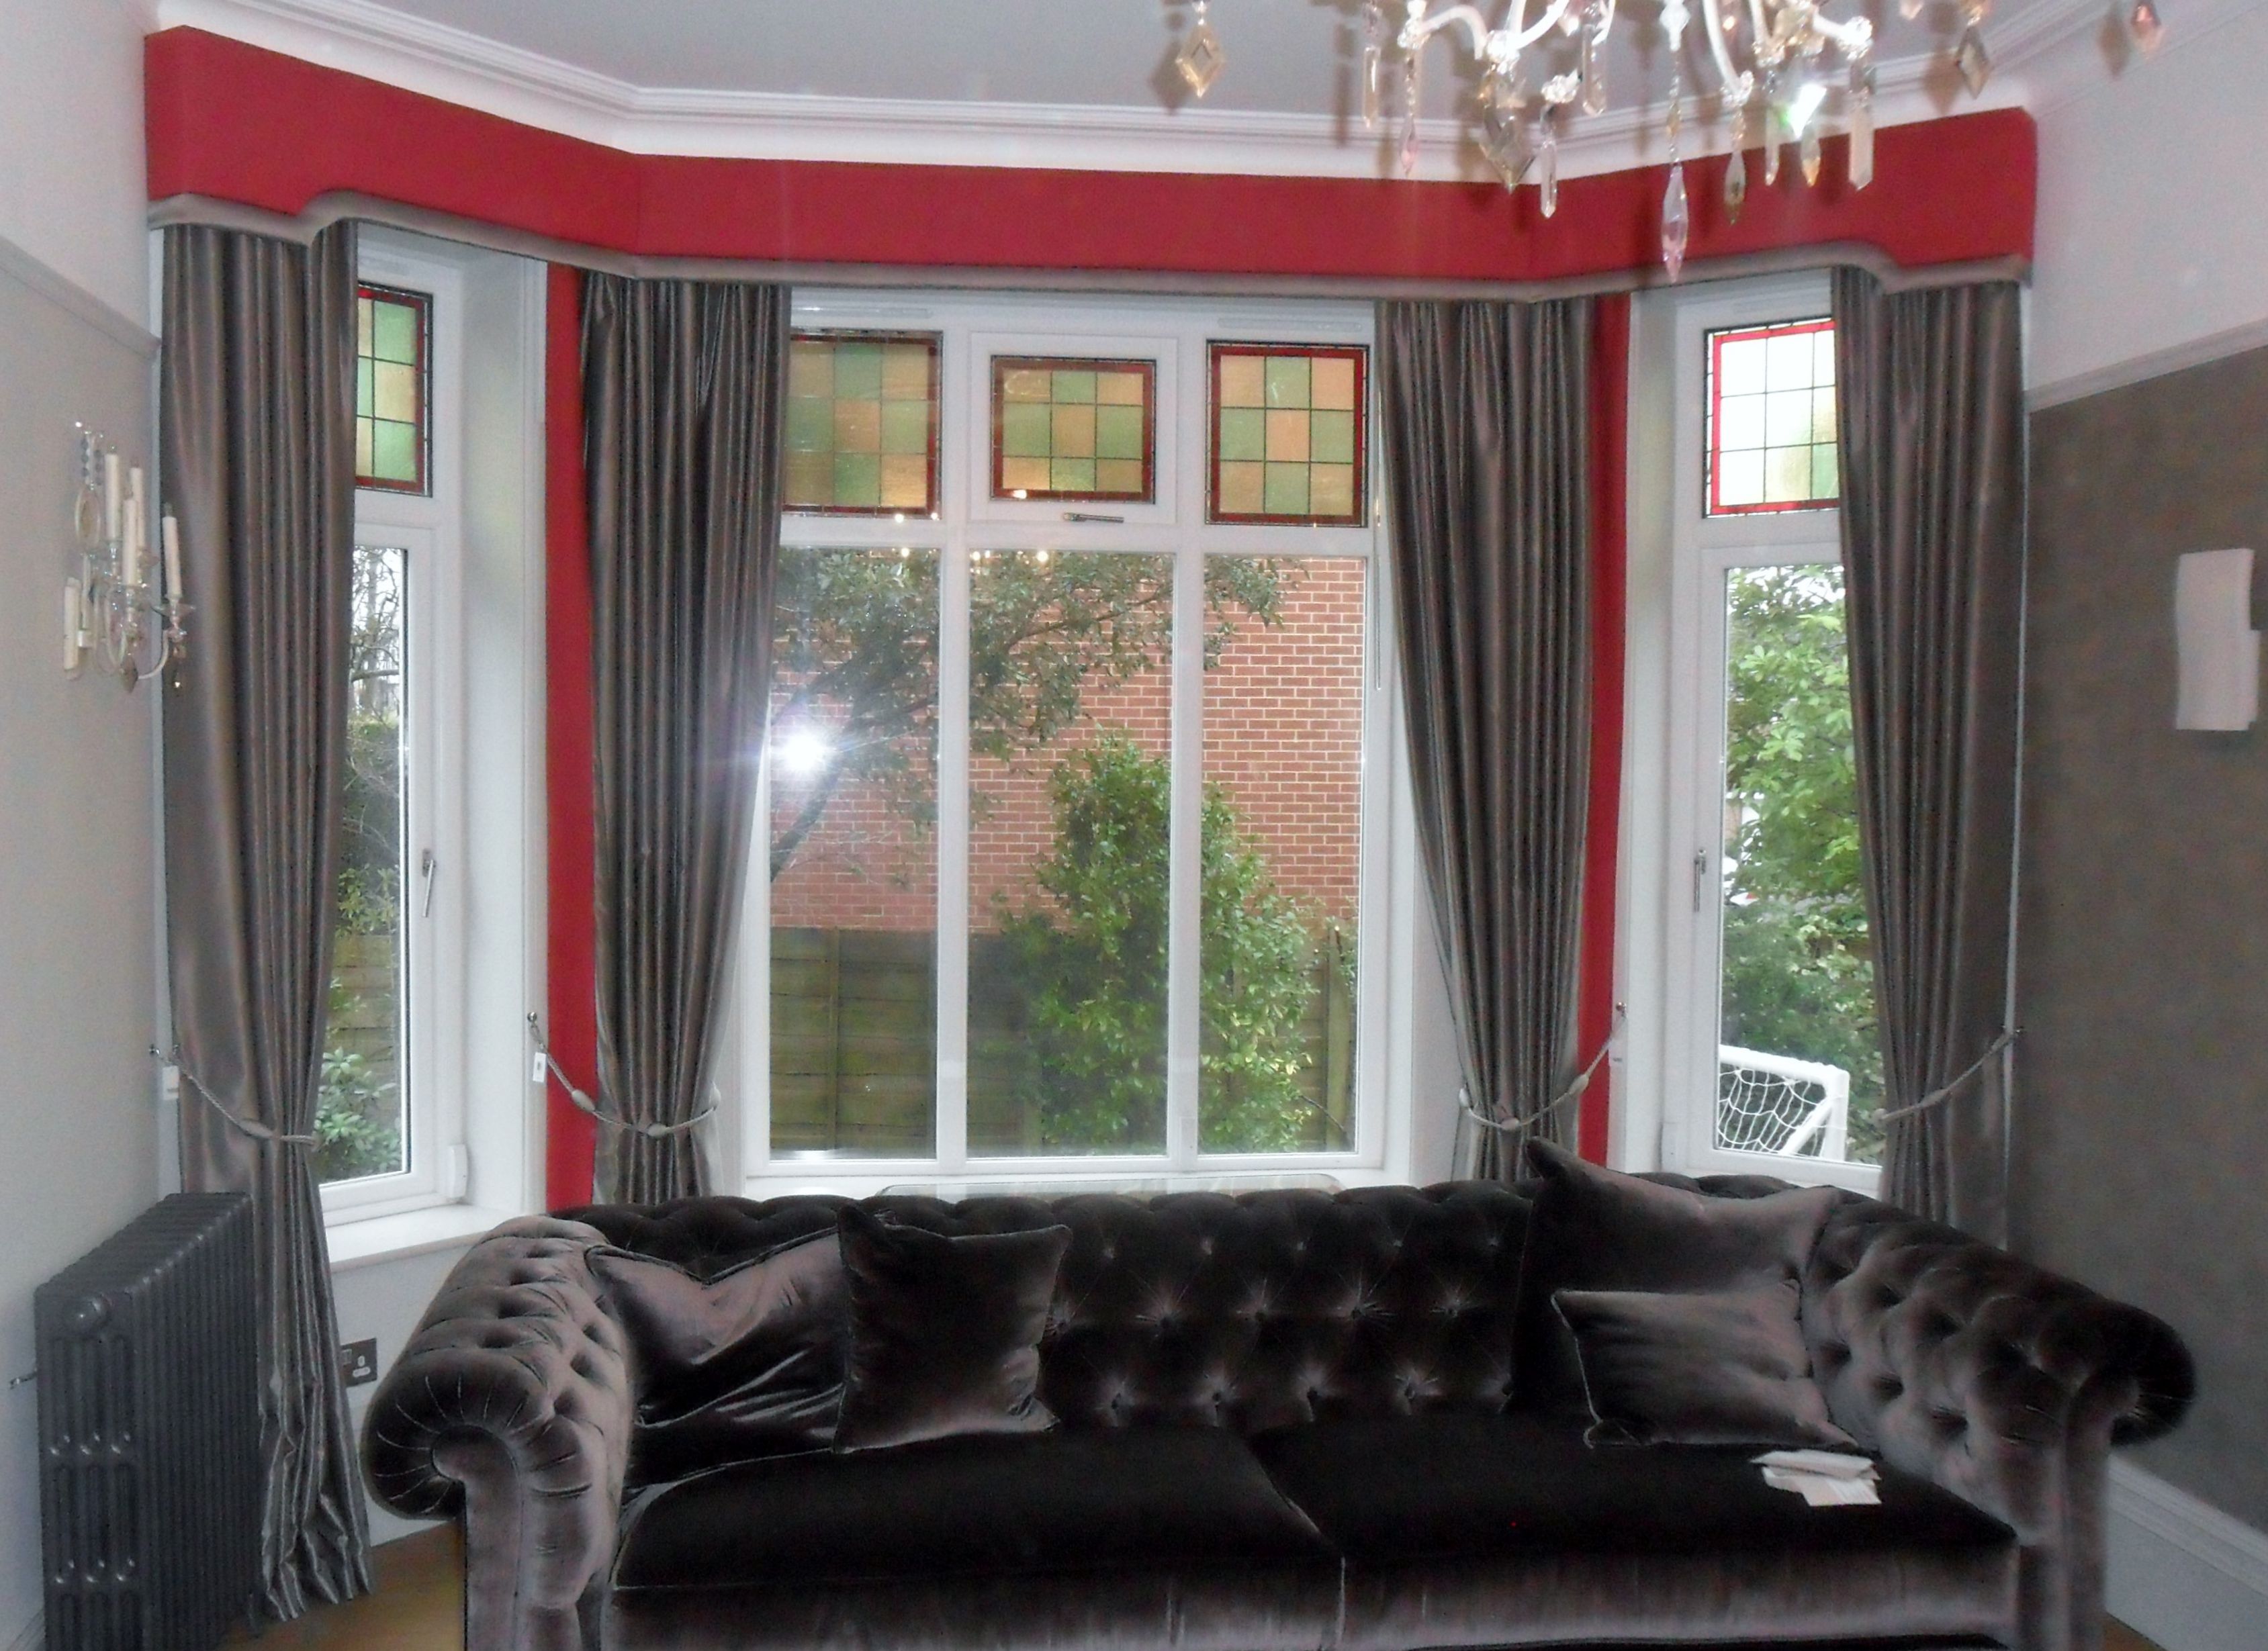 Elegant bay window pelmet with shaped ends and contrasting border. These work really well with the coordinating curtains.